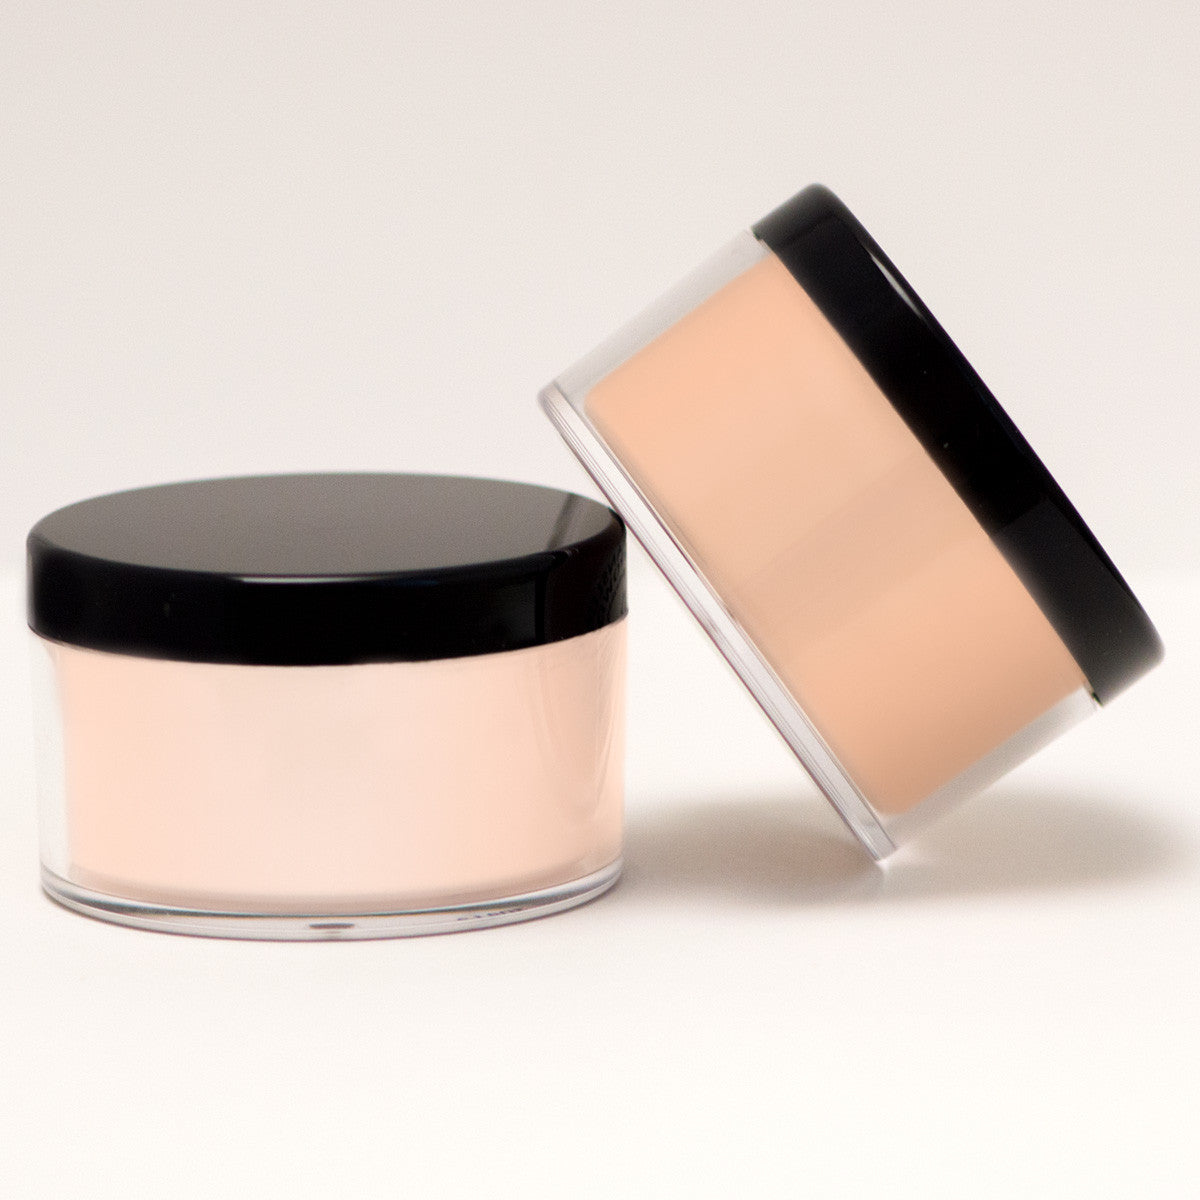 Beige Loose Translucent Face Powder (Also known as medium-light)